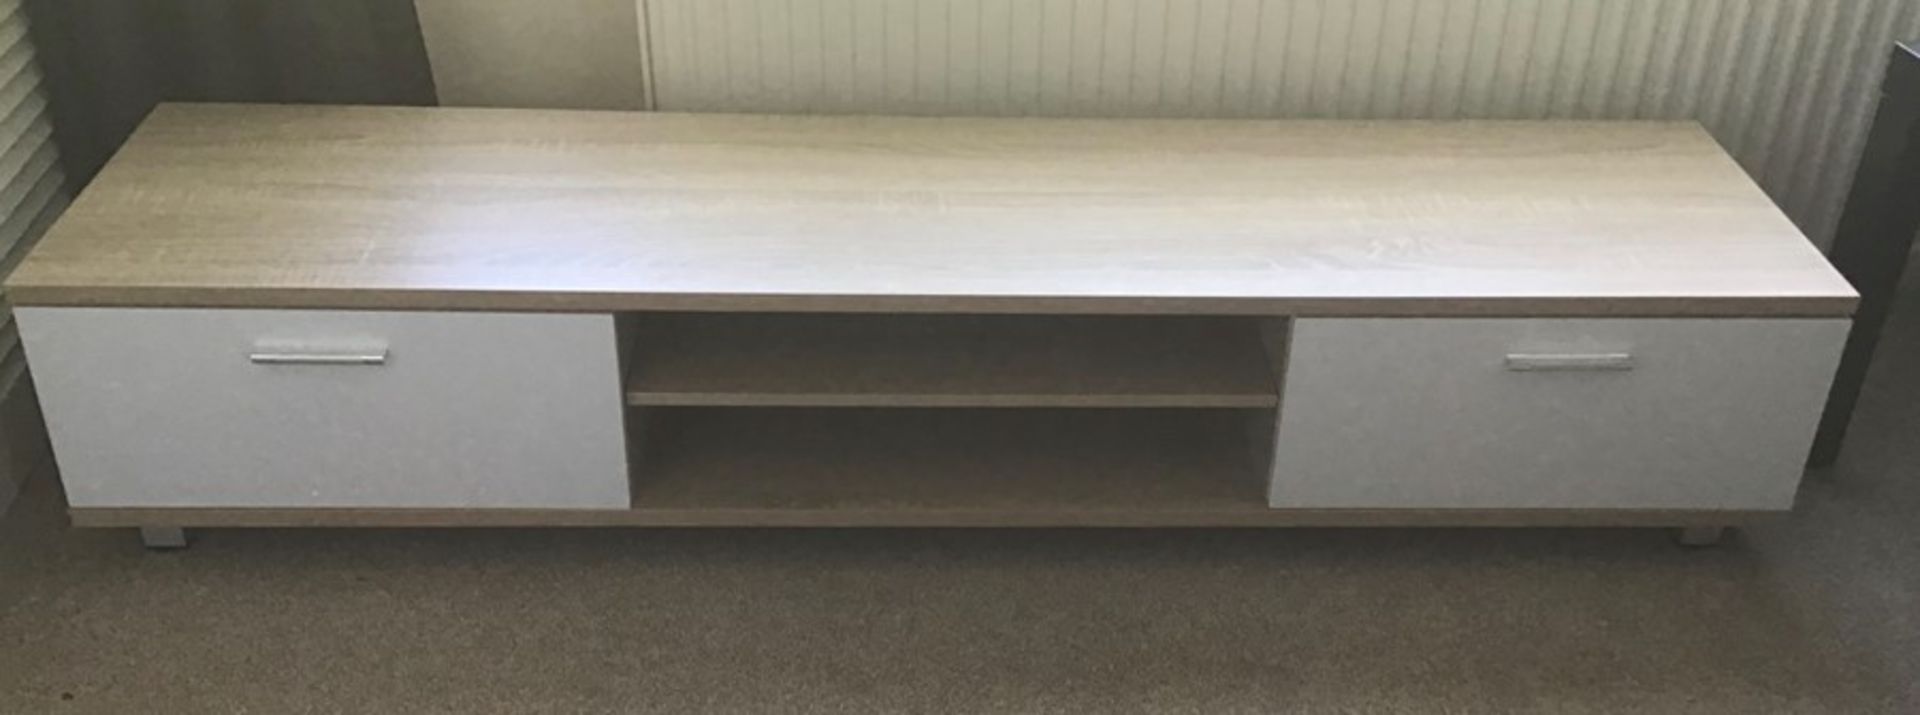 Oak and white 128cm TV stand, brand new, flat packed and boxed. RRP Circa £100.00 | 1x Box